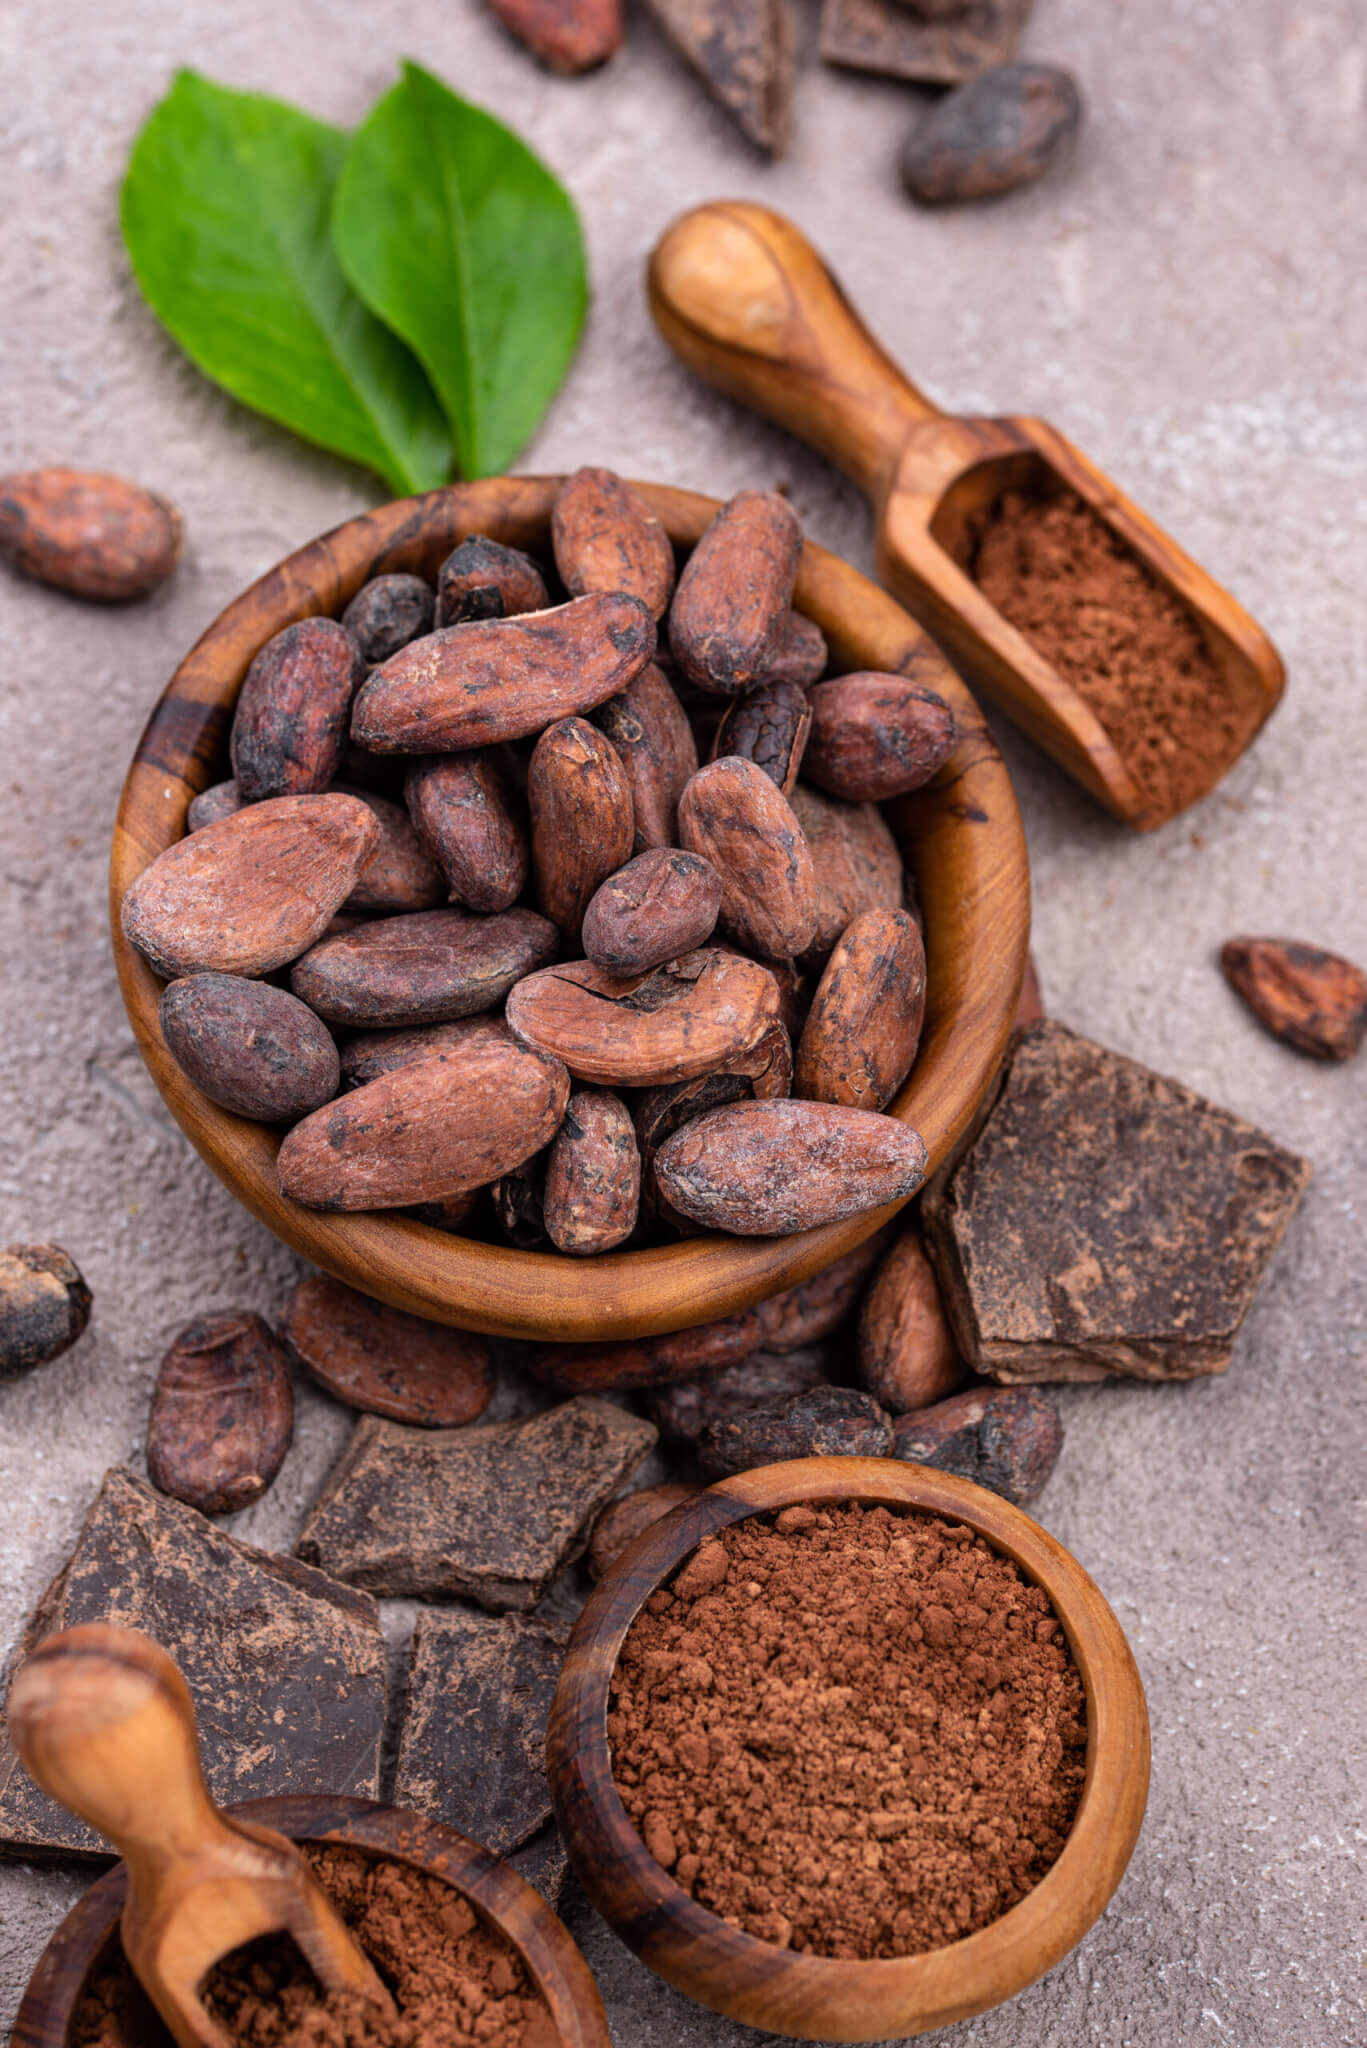 Natural cocoa powder, cocoa beans and pieces of dark chocolate